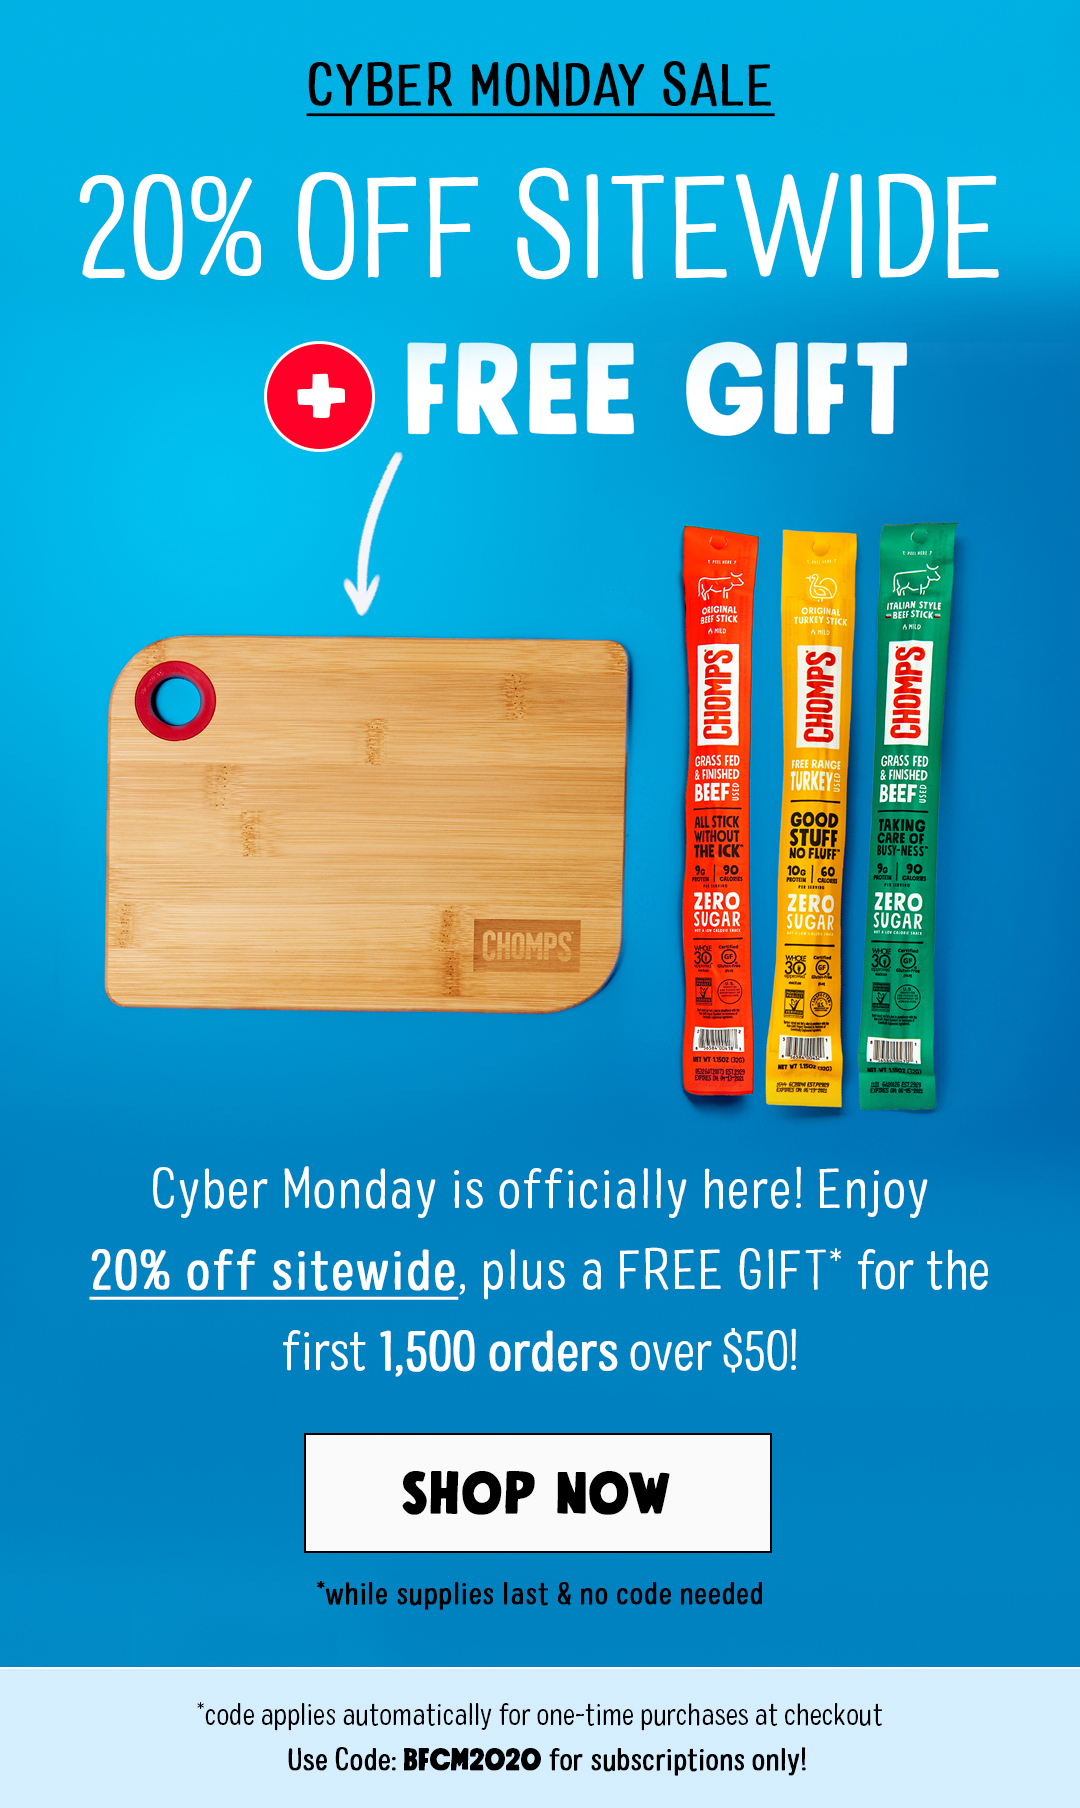 Cyber Monday is officially here! Enjoy 20% off sitewide, plus a free gift* for the first 1,500 orders over $50!